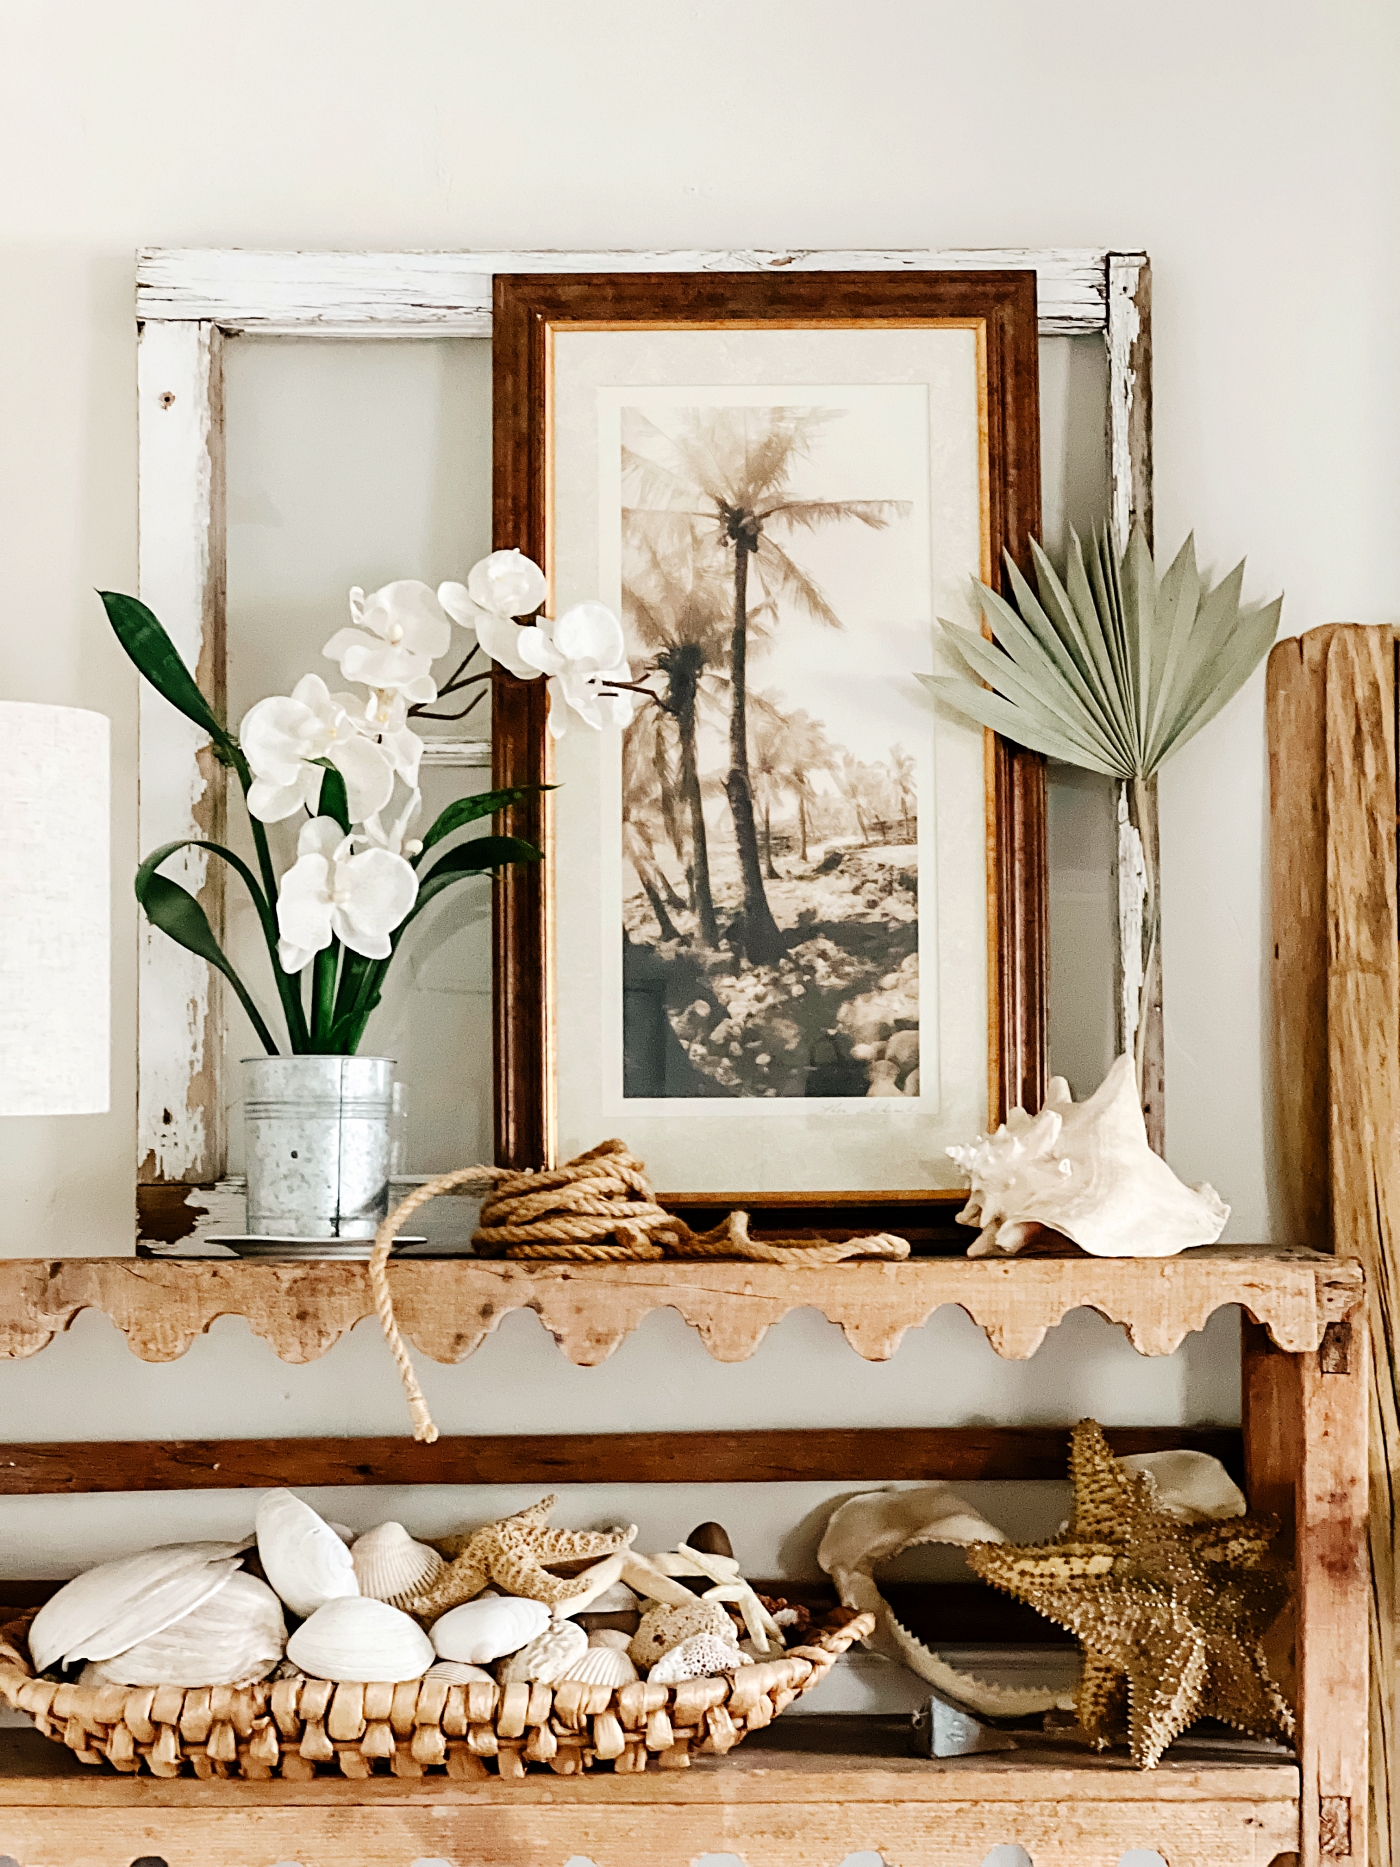 A Tropical Home Display - Shop this look!